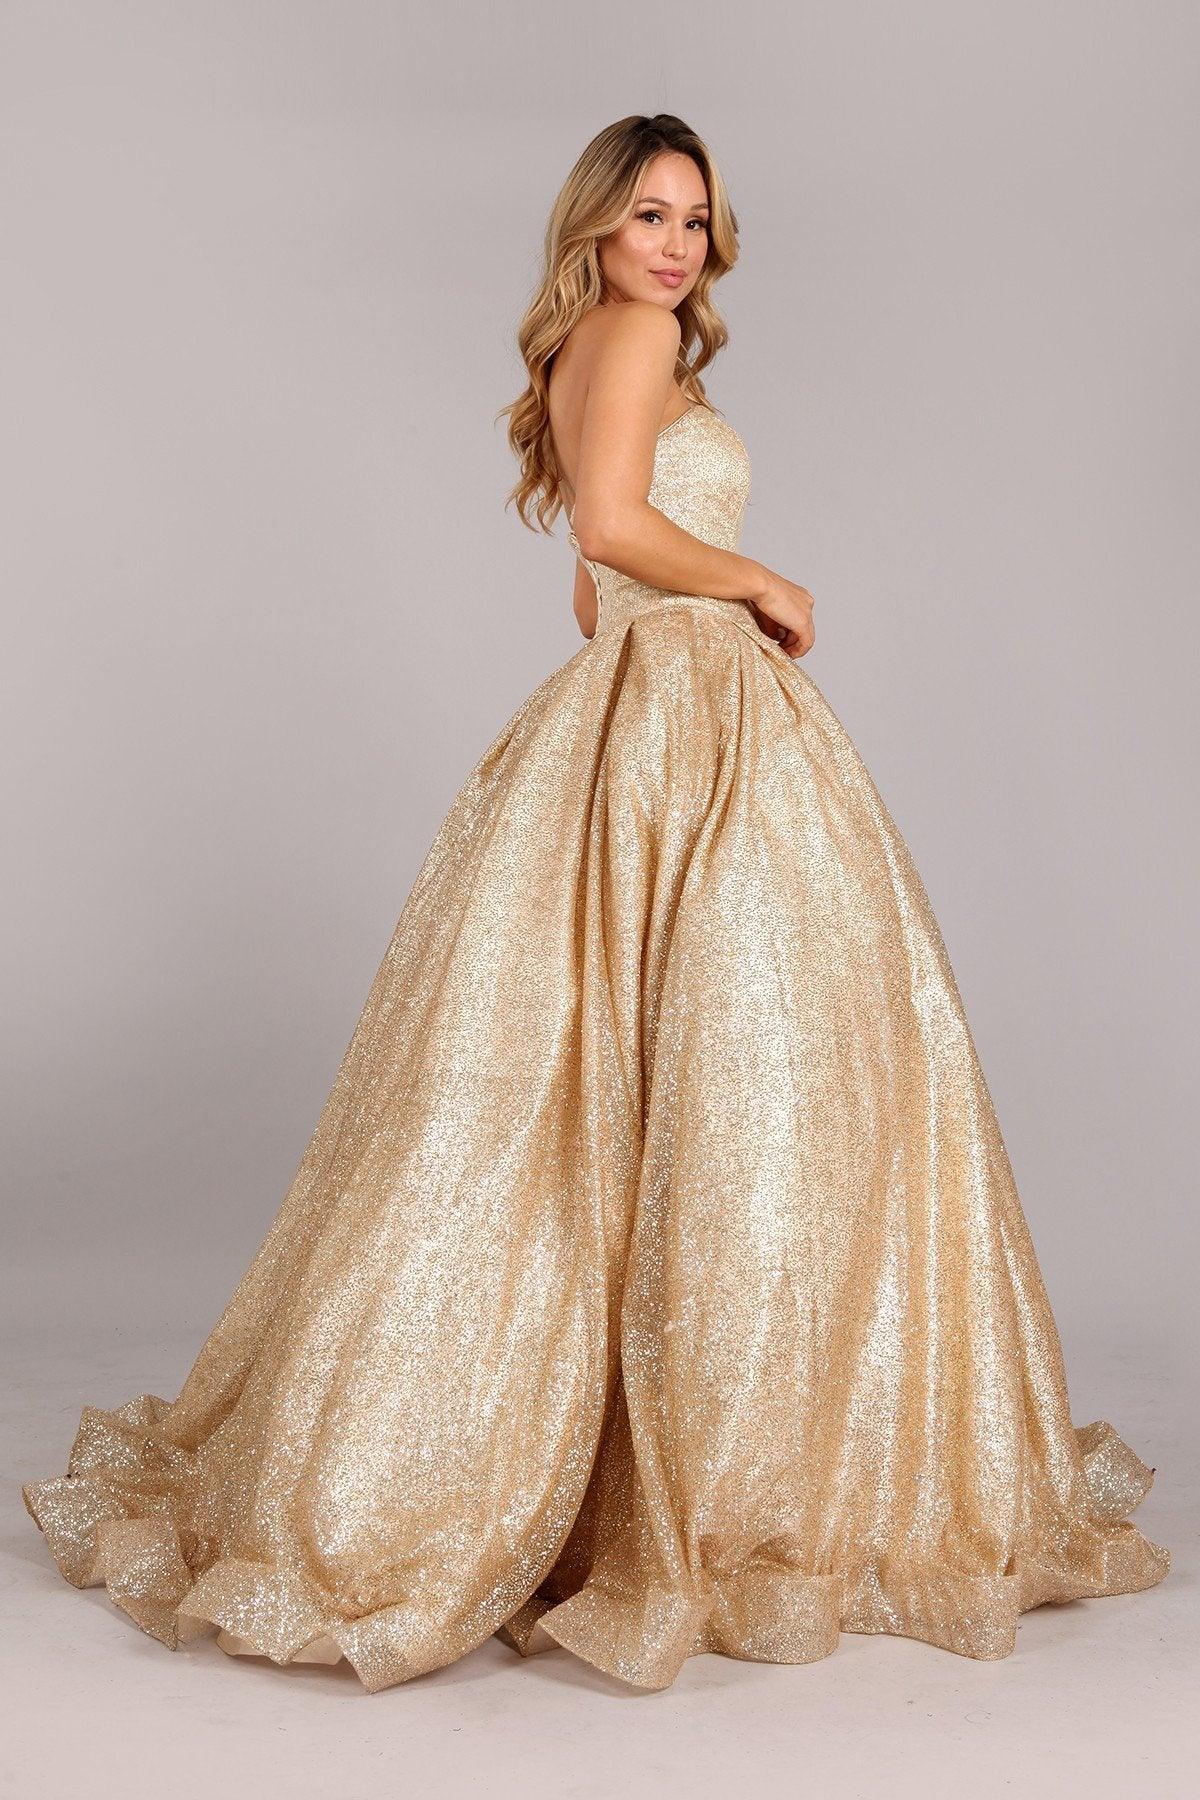 Long Strapless Prom Glitter Ball Gown - The Dress Outlet